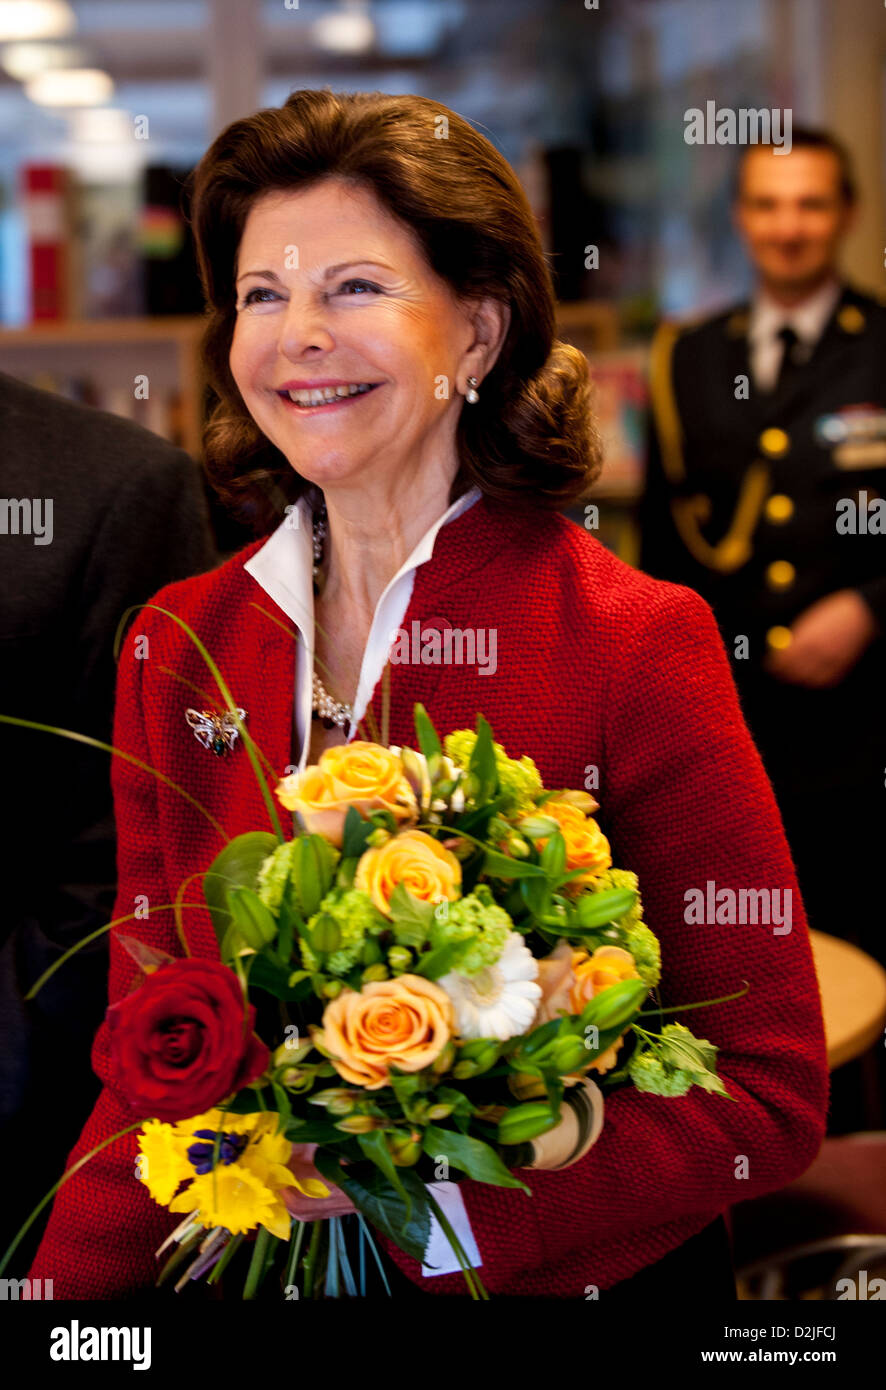 Queen silvia hi-res and photography - Alamy stock images